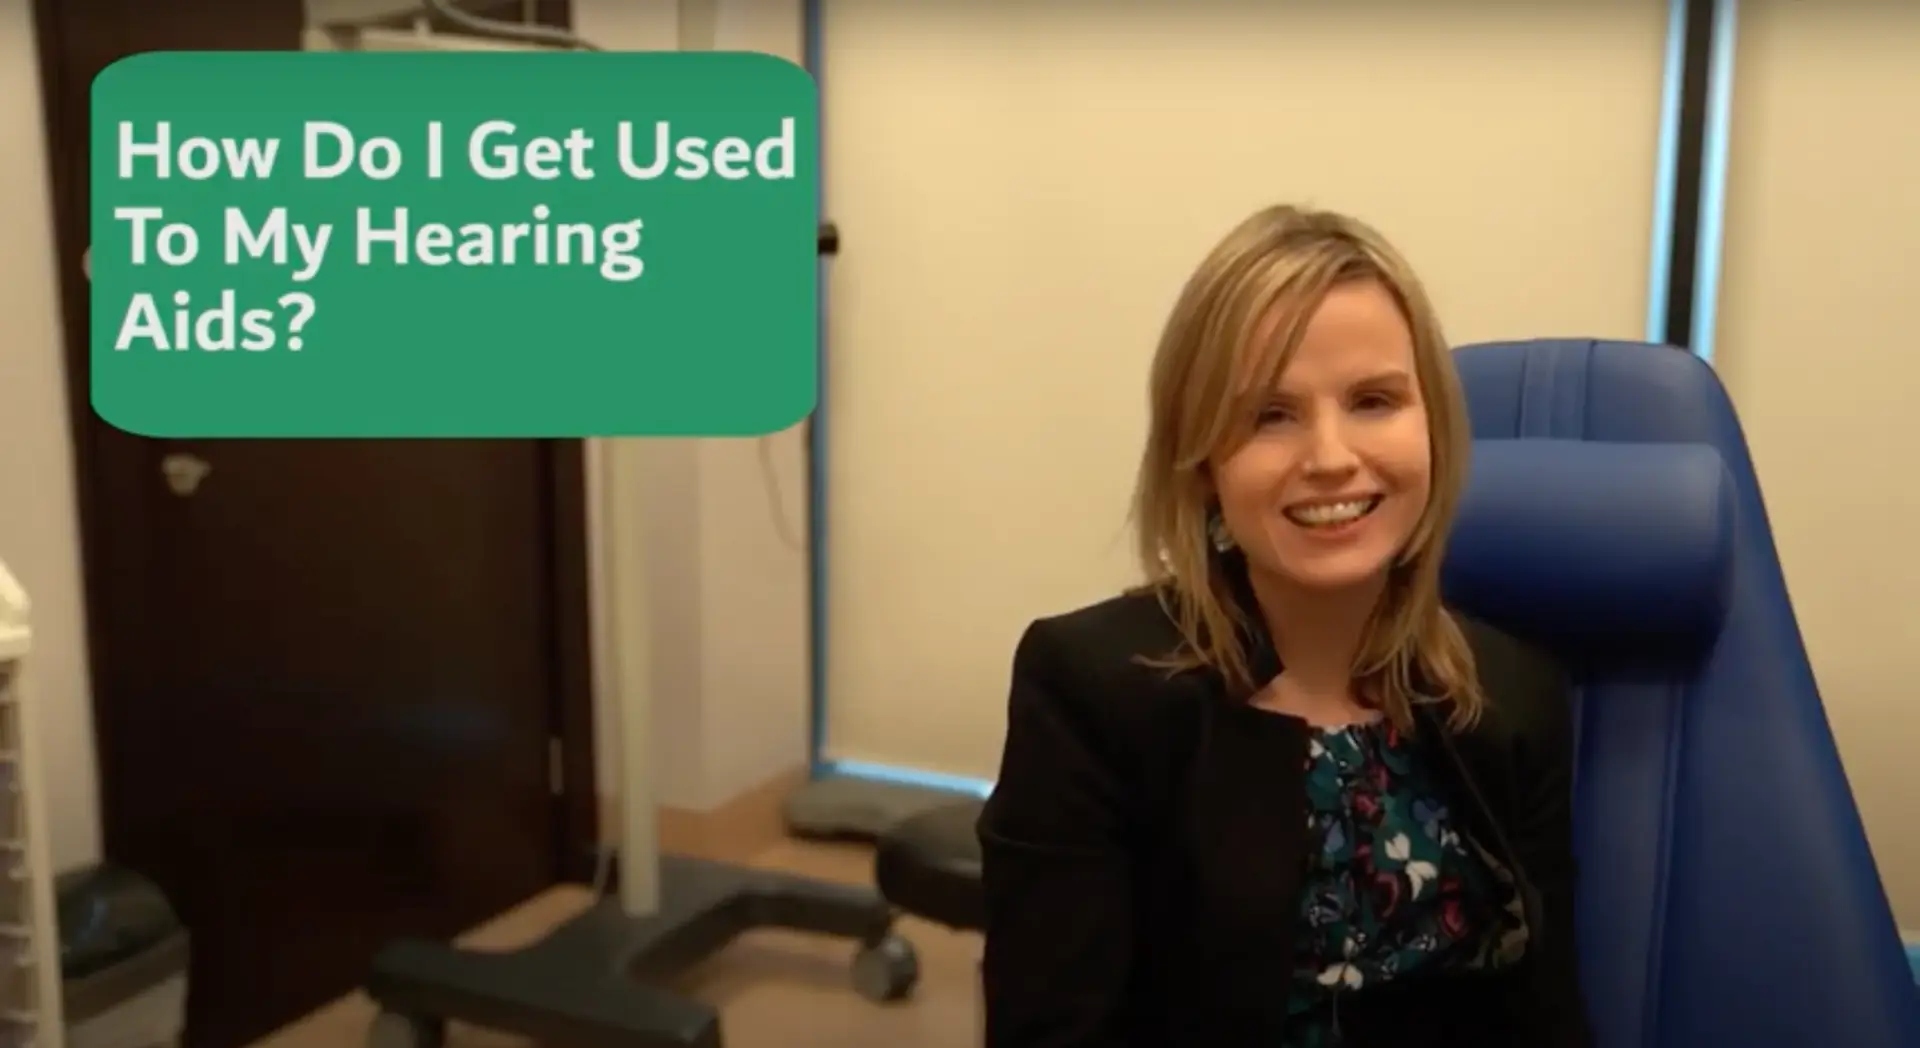 How do I get used to my hearing aids? Image